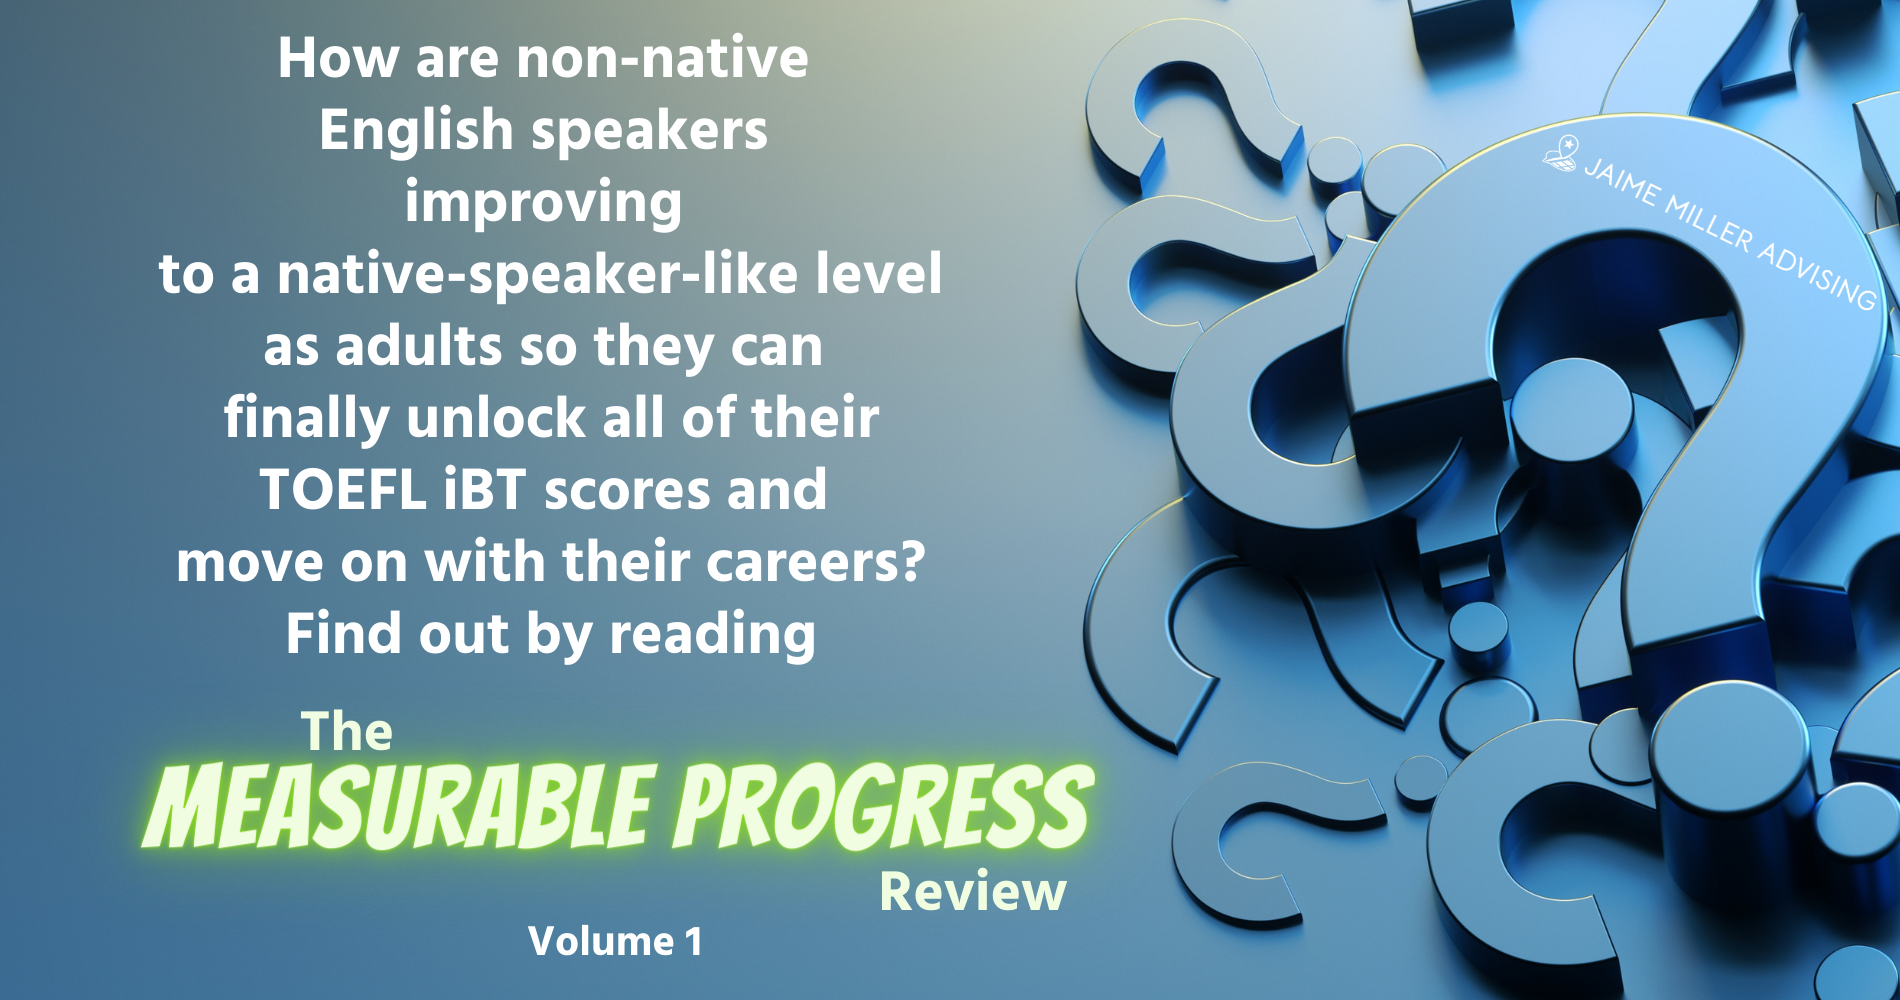 How are non-native English speakers improving to a native-speaker-like level as adults so they can finally unlock all of their TOEFL iBT scores and move on with their careers? Find out by reading